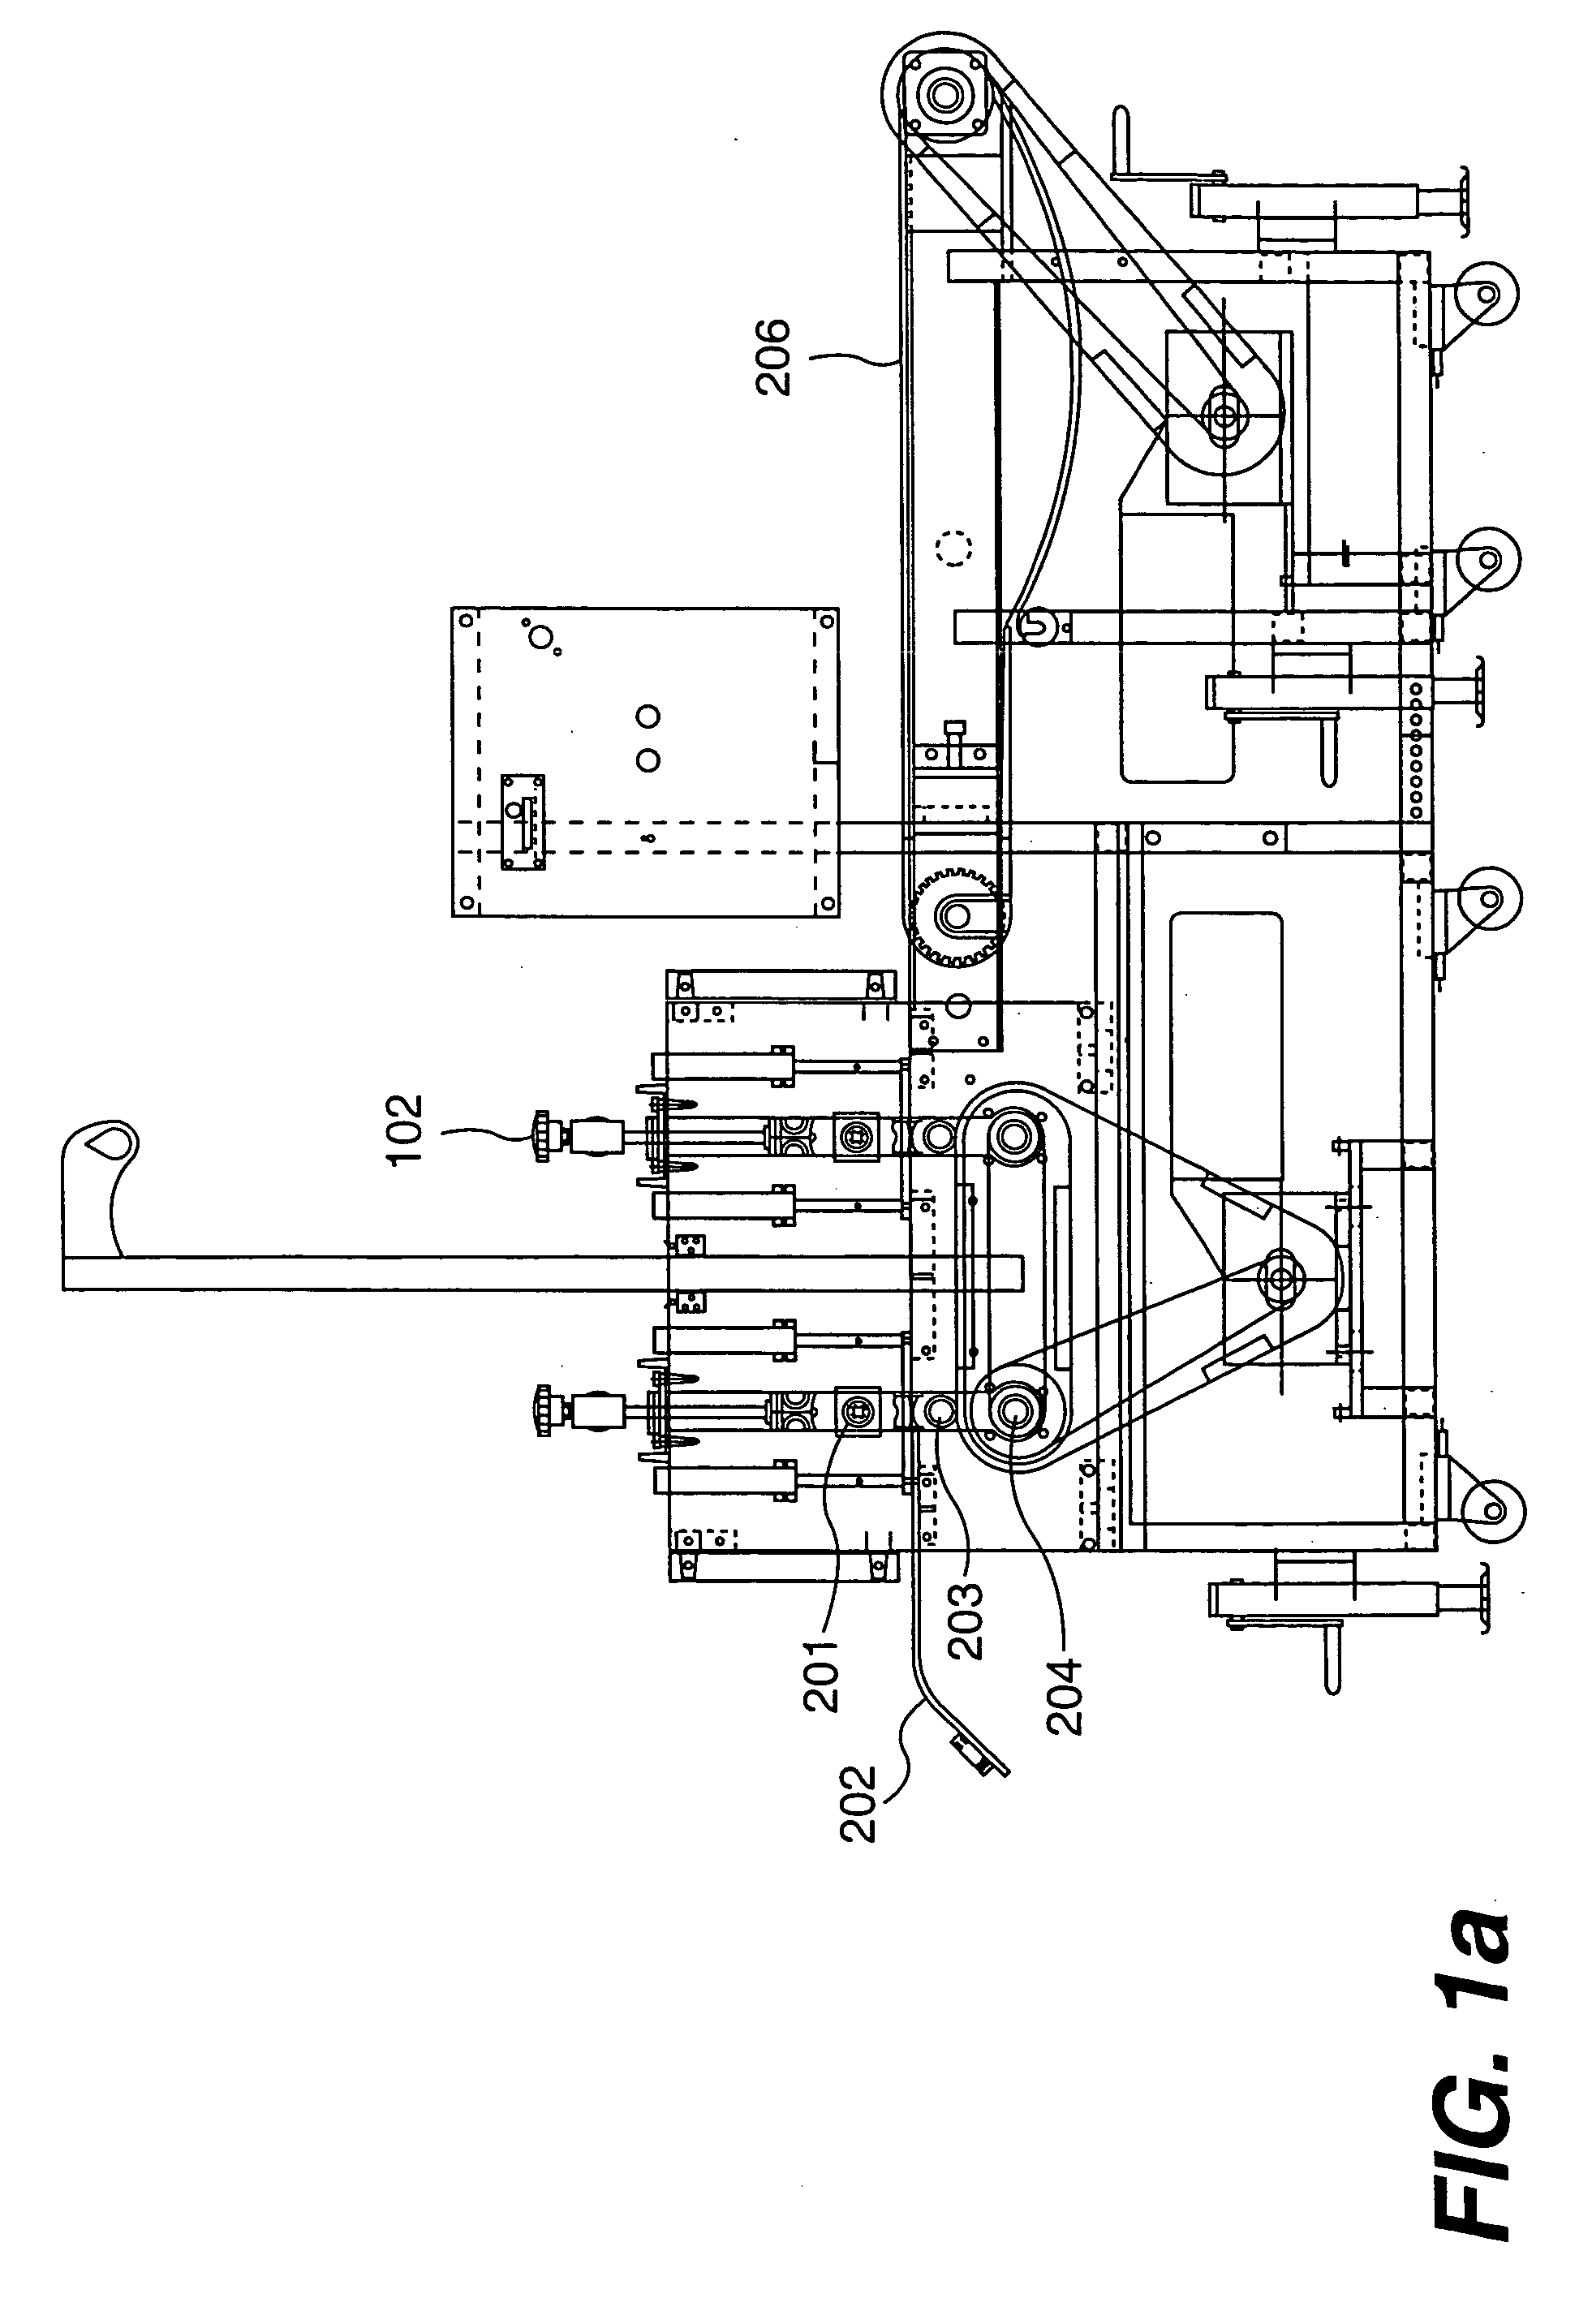 Method and apparatus for die cutting and making laminate articles